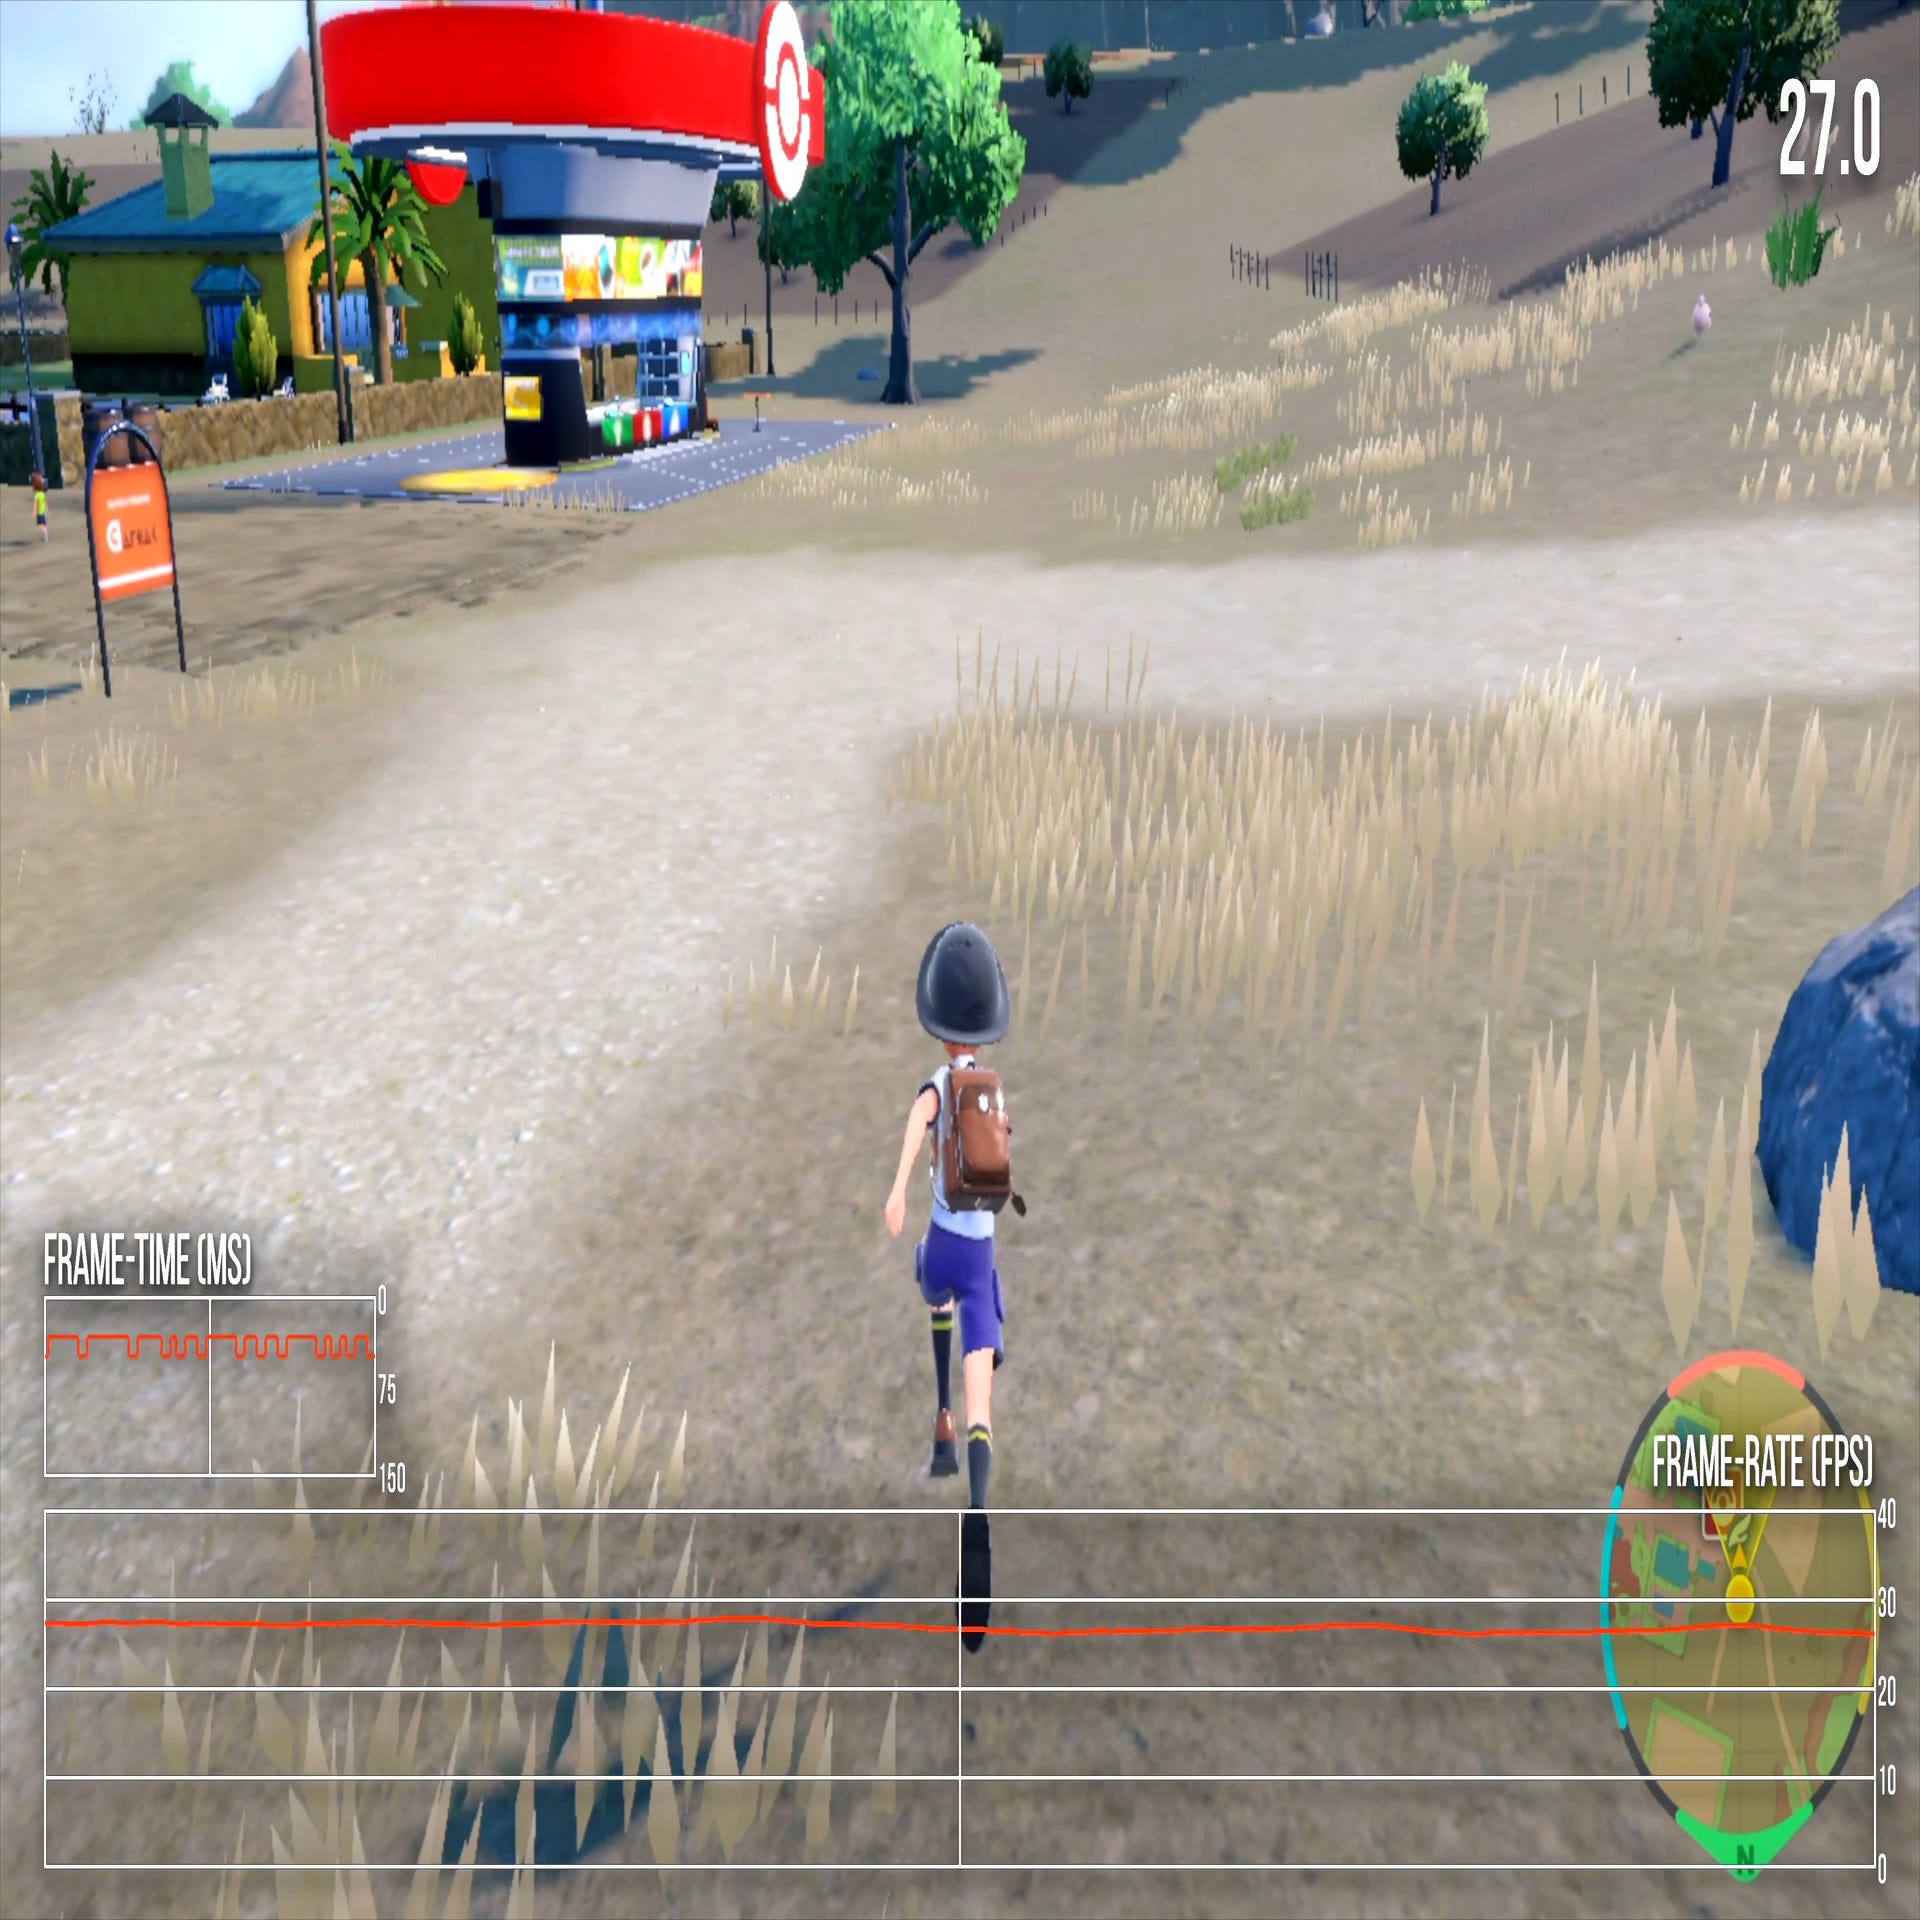 Pokémon Scarlet and Violet deliver a fully open world beset by technical  problems